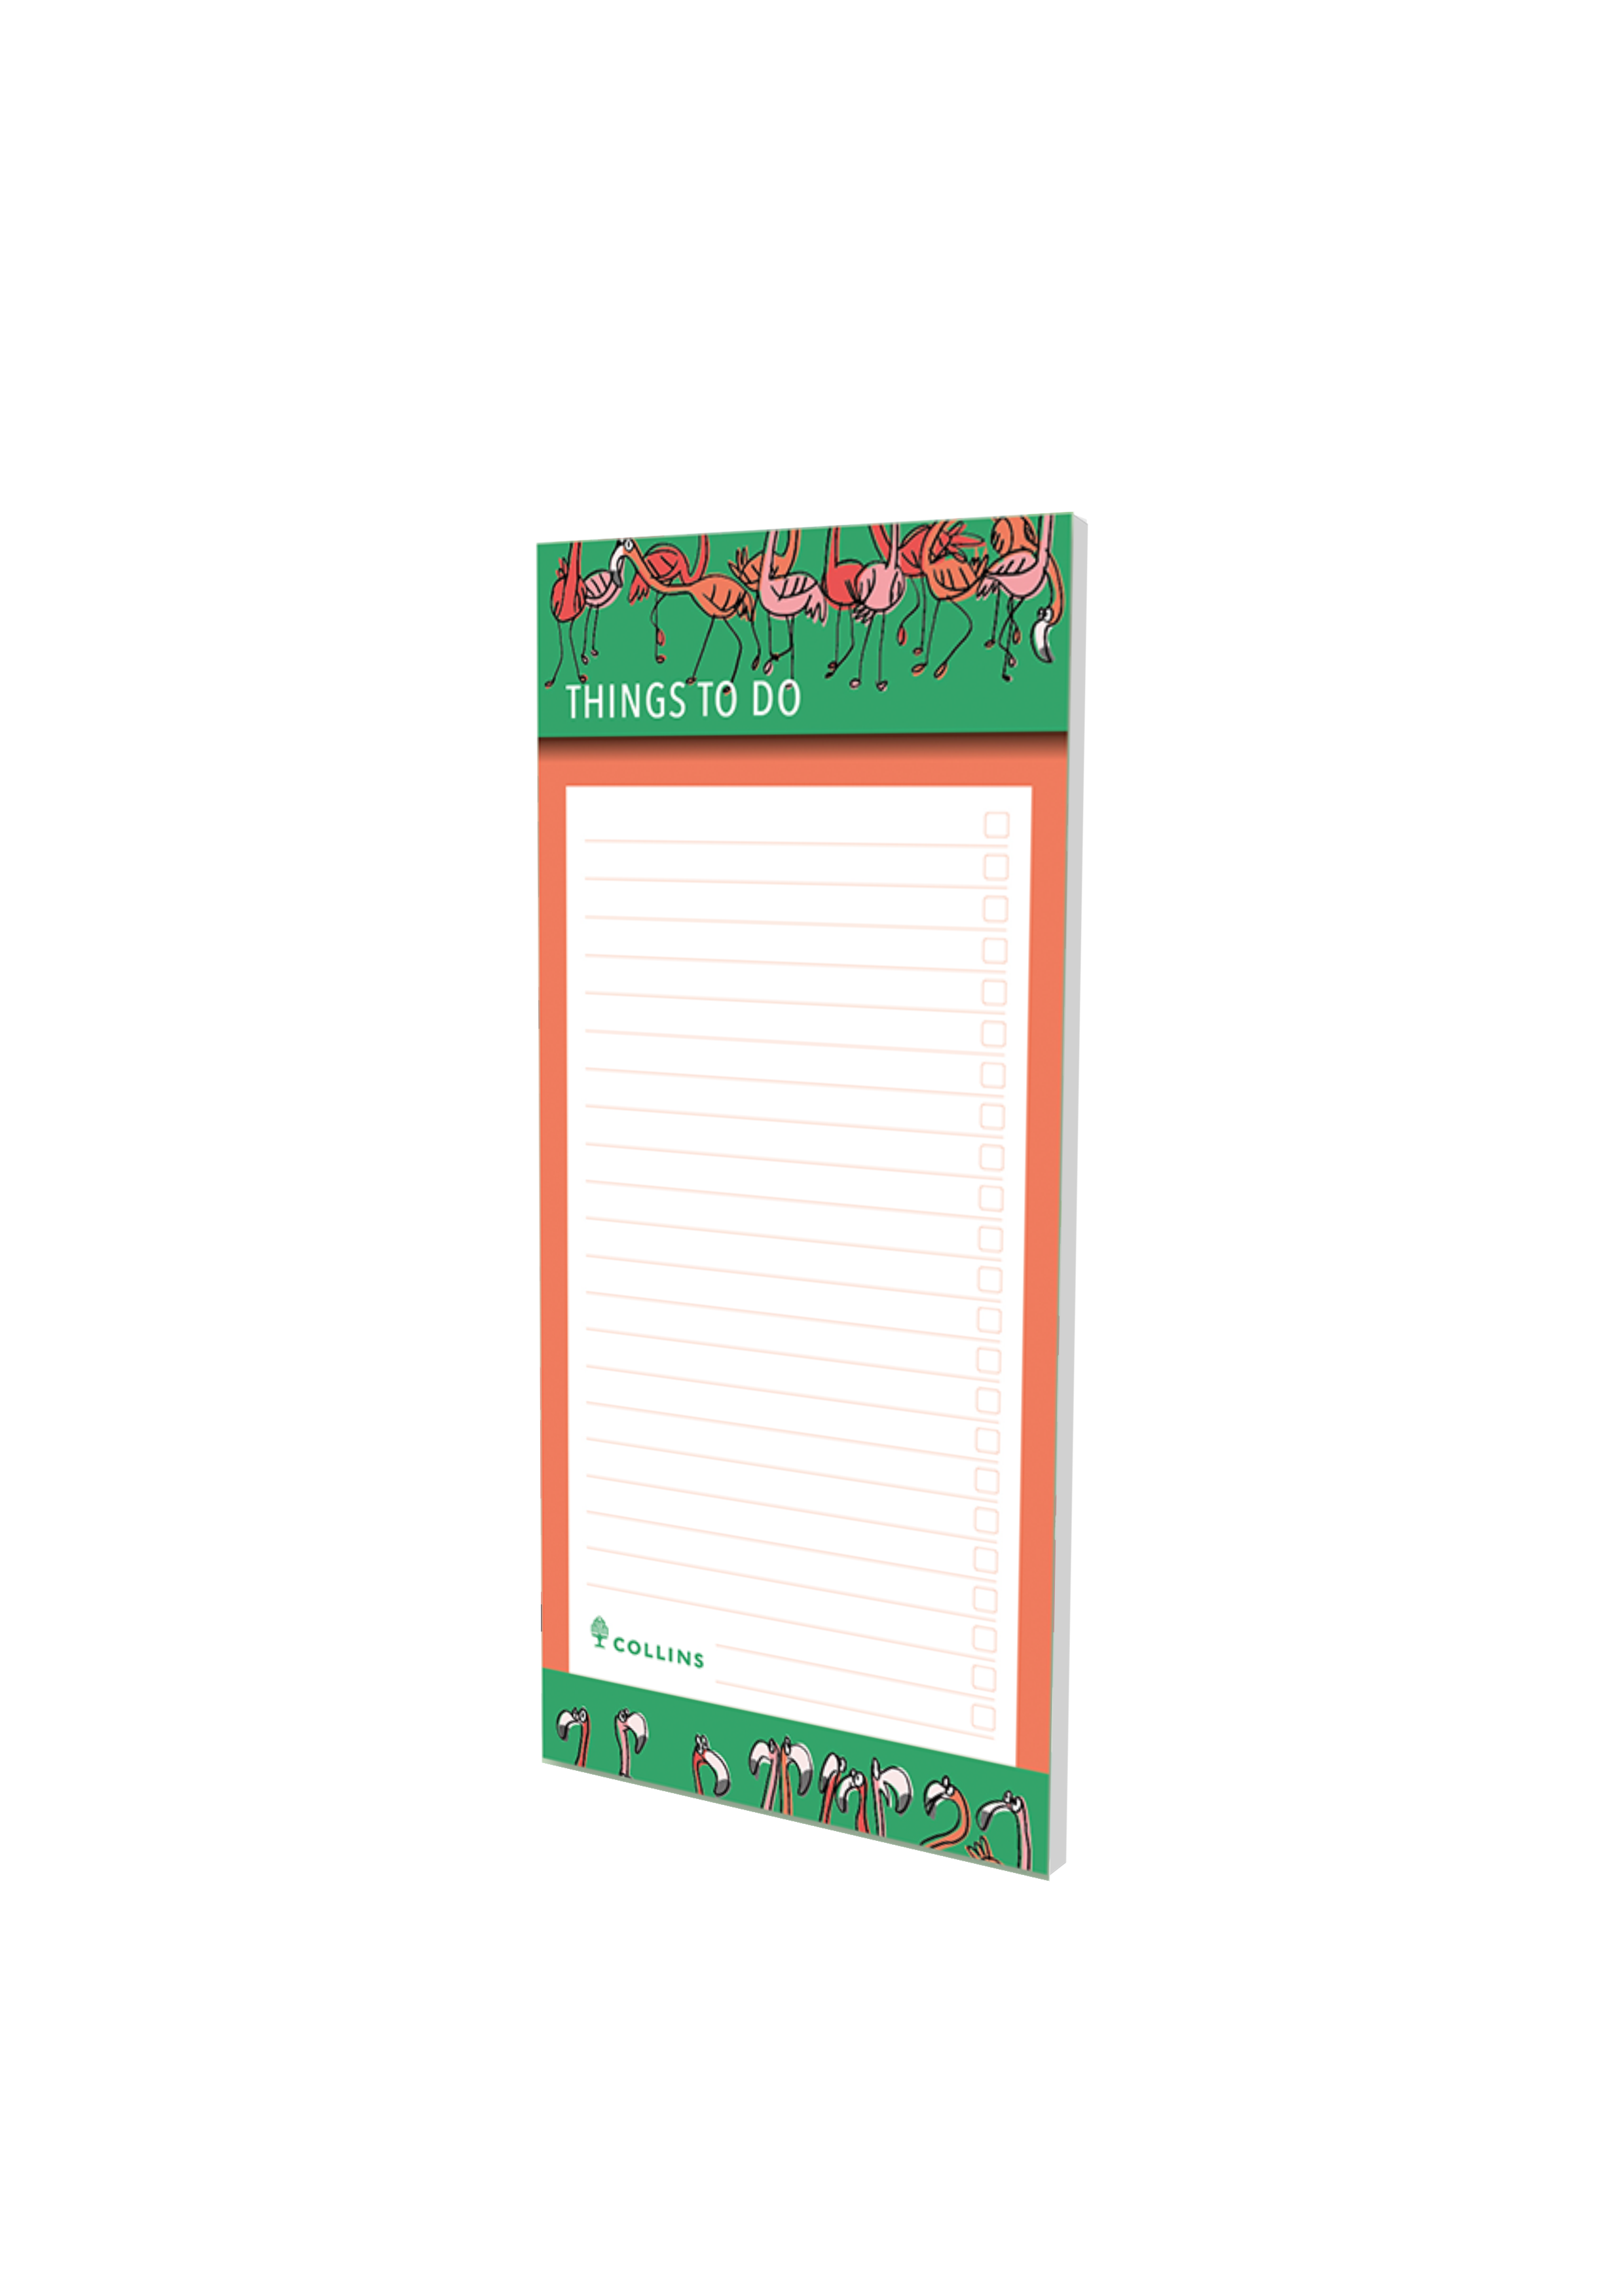 Collins Flourish - The Animal Project To Do List - Slim Magnetic Pad